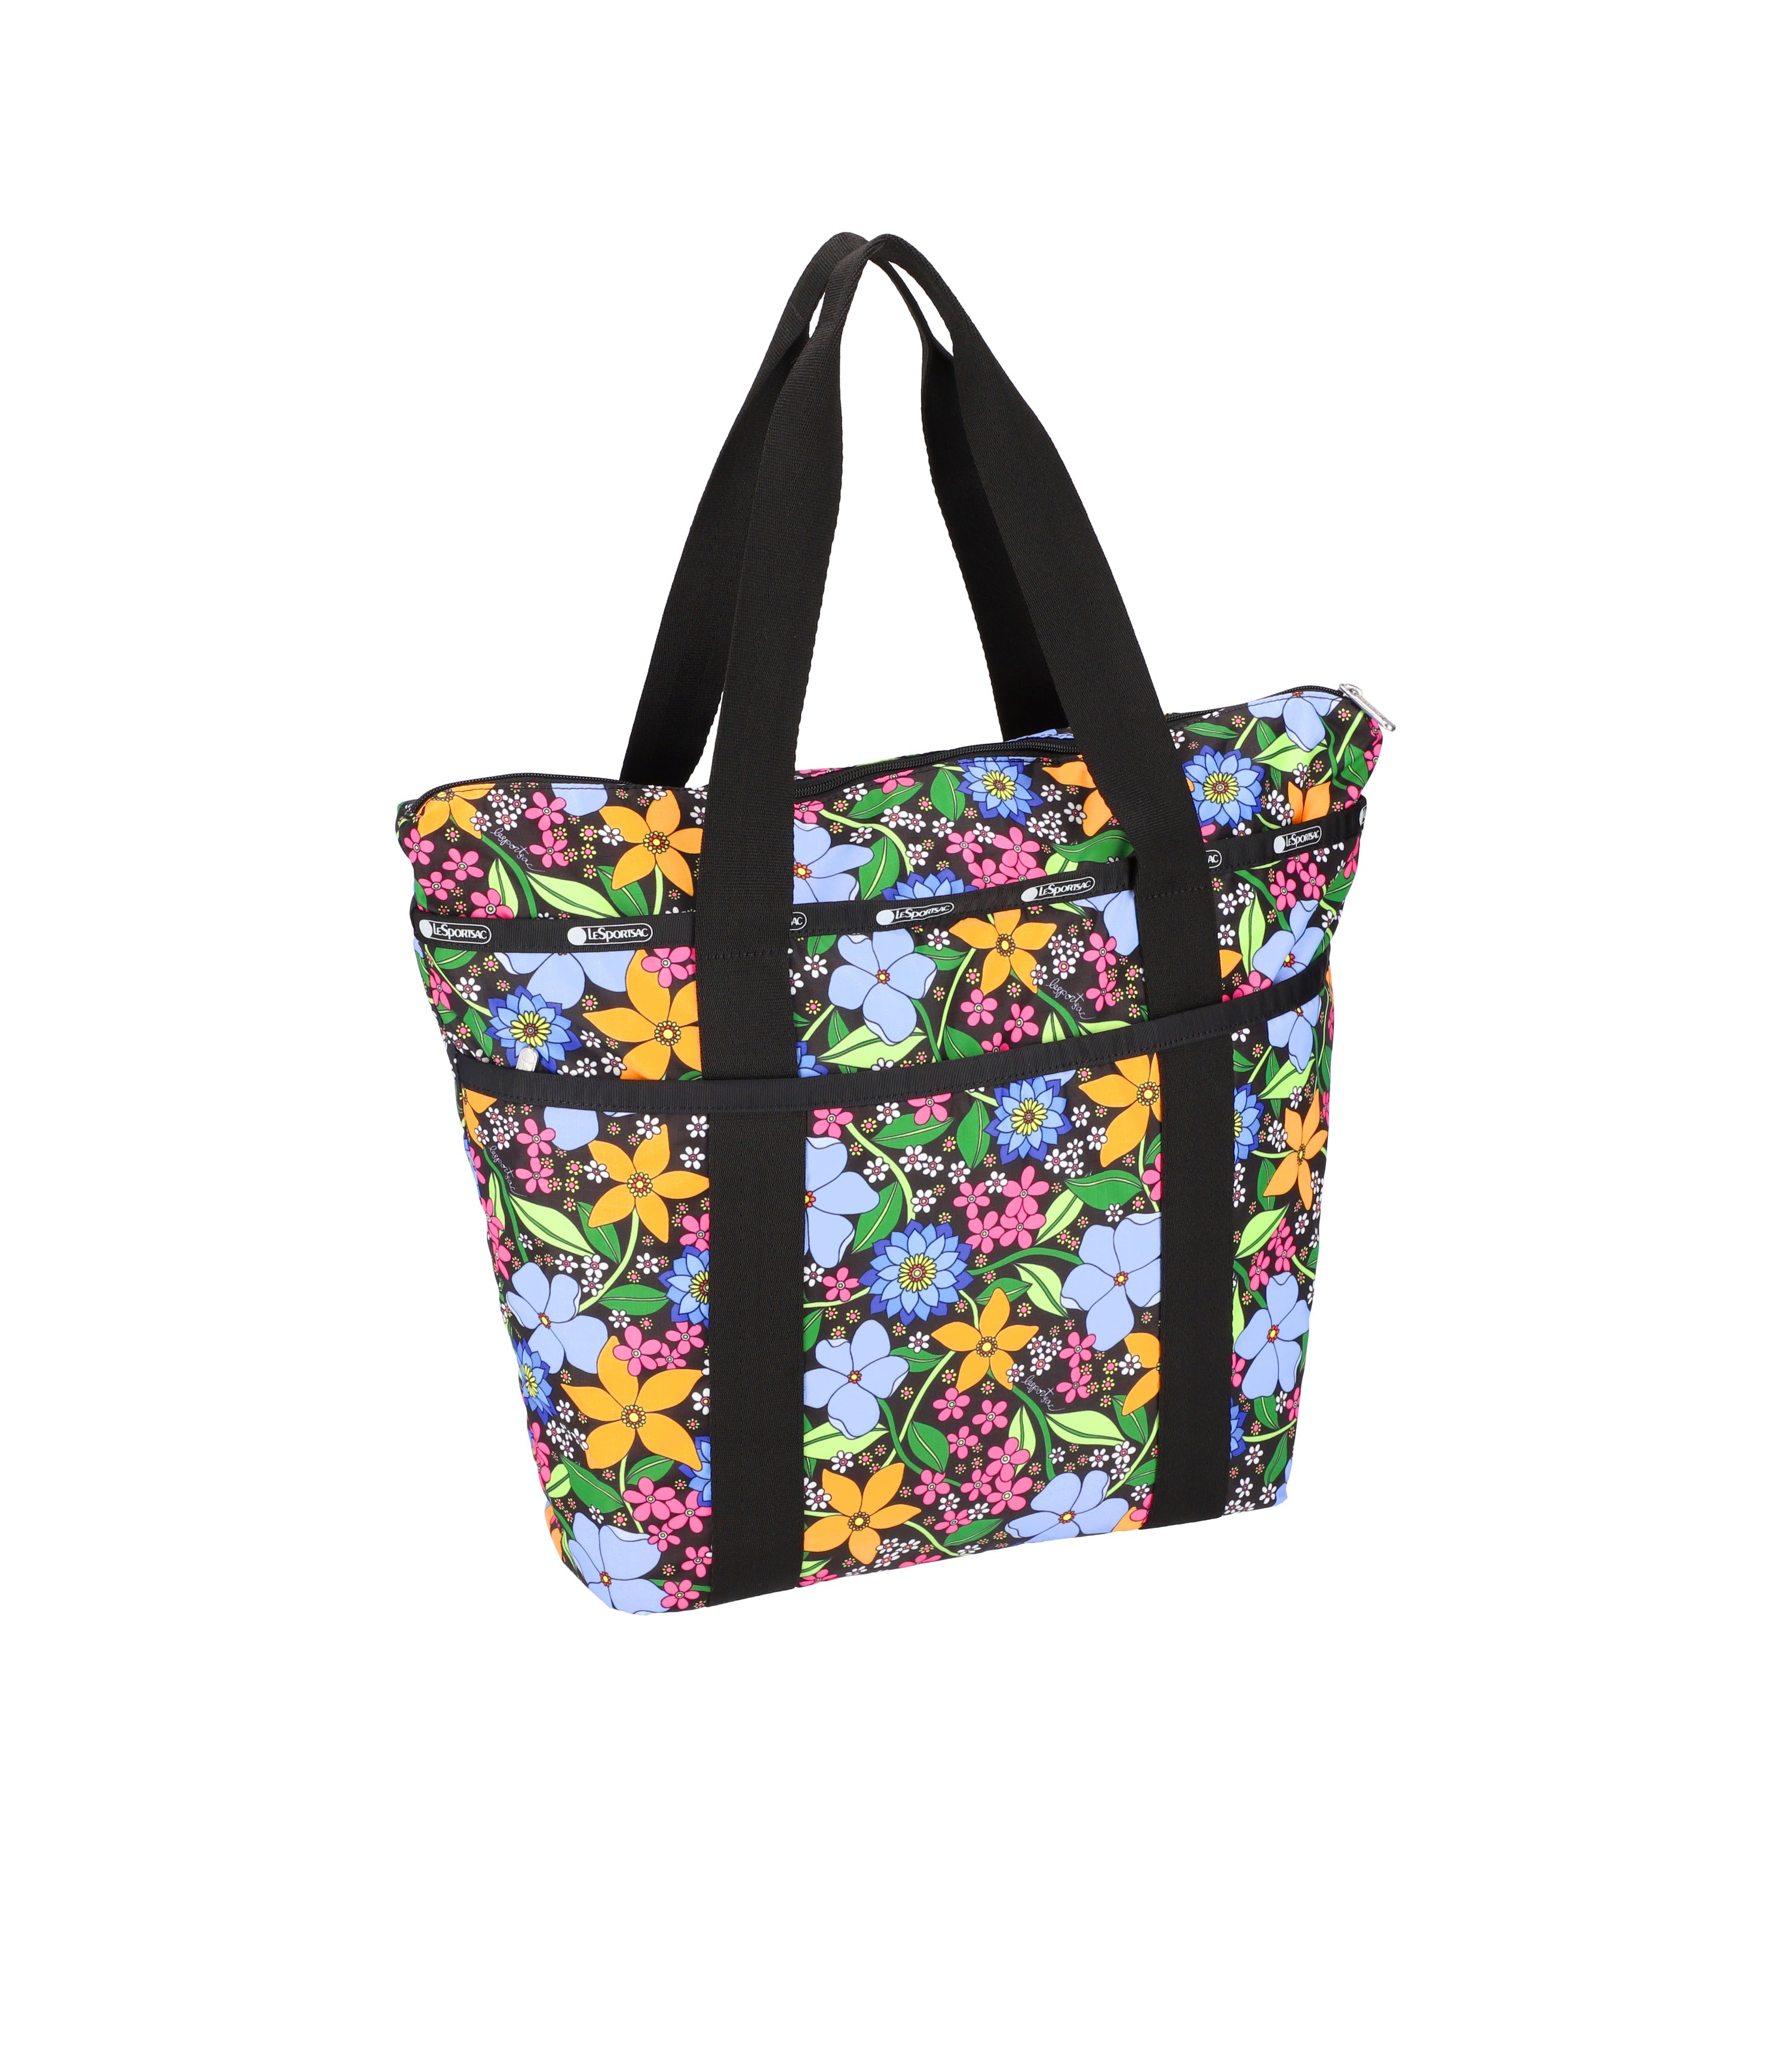 Lesportsac Everyday Zip Tote - Black Solid